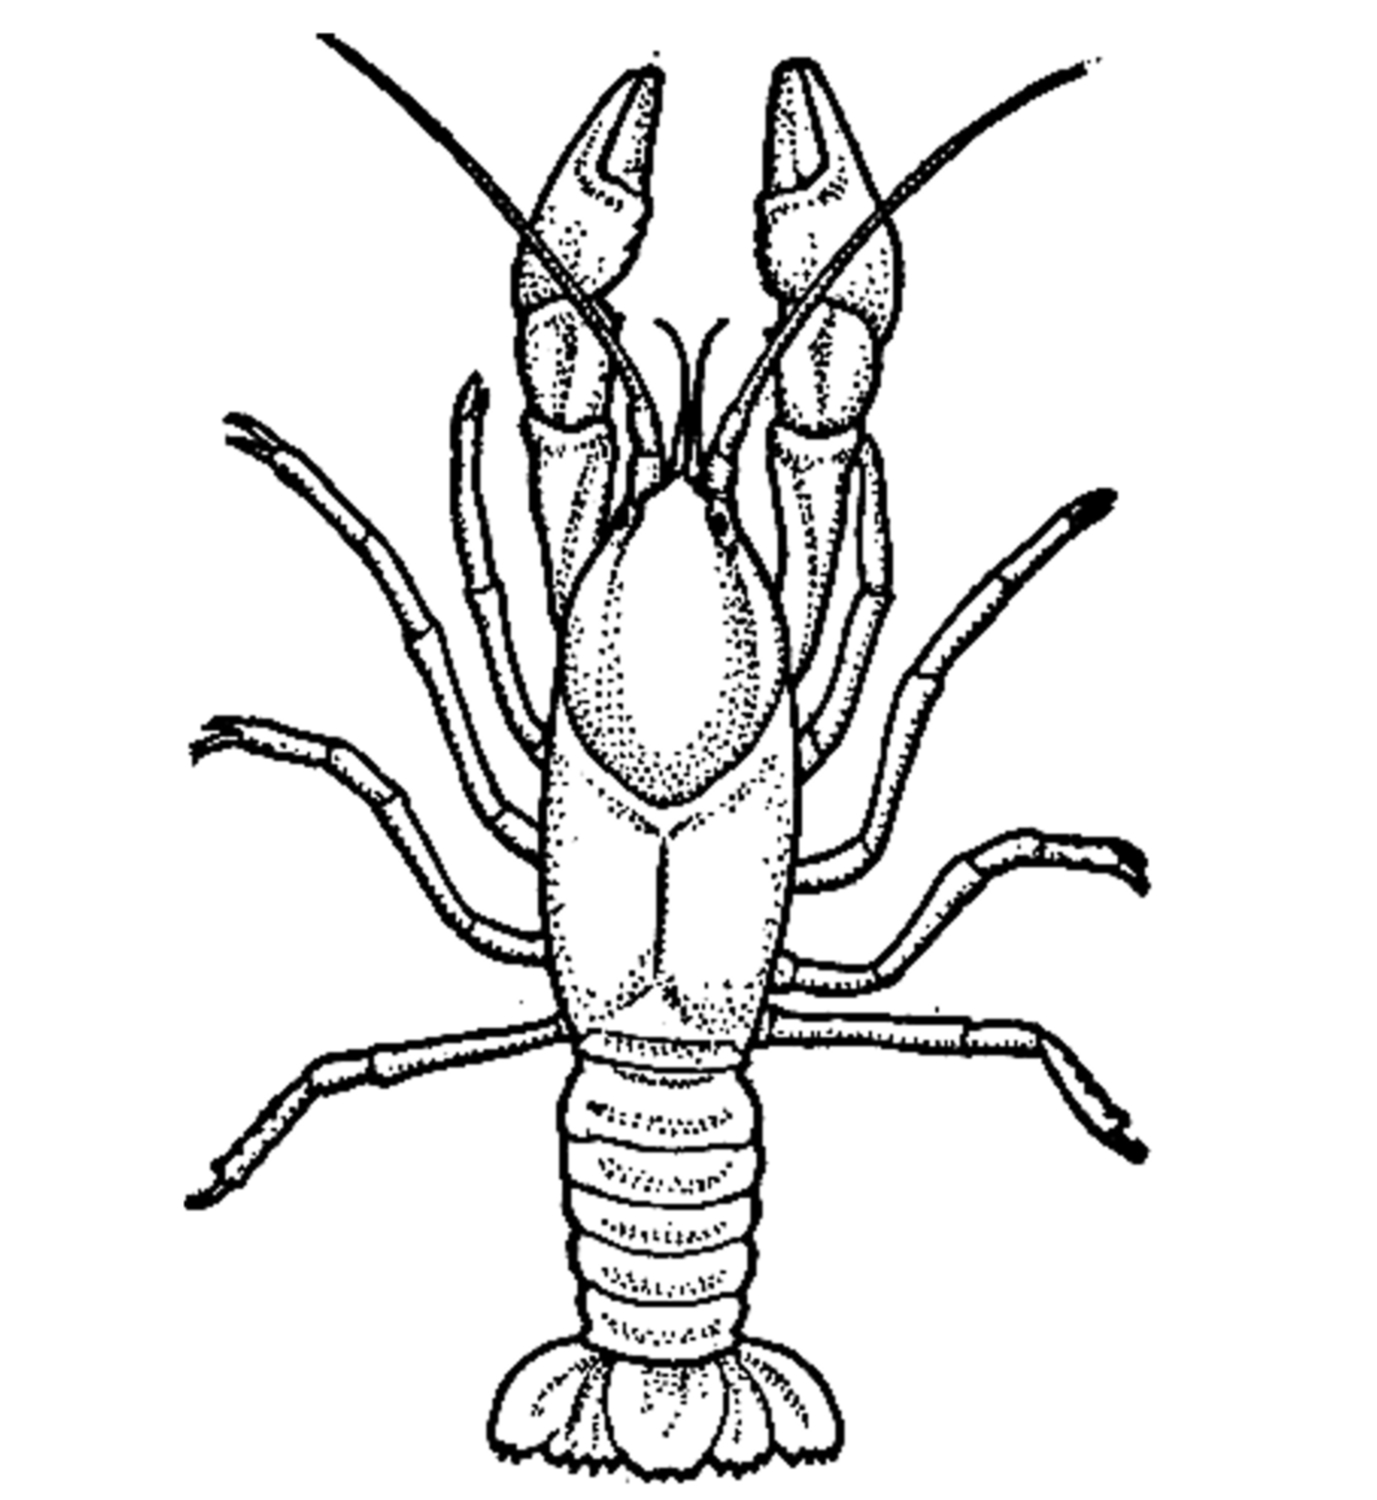 Drawing Of Crawfish - ClipArt Best